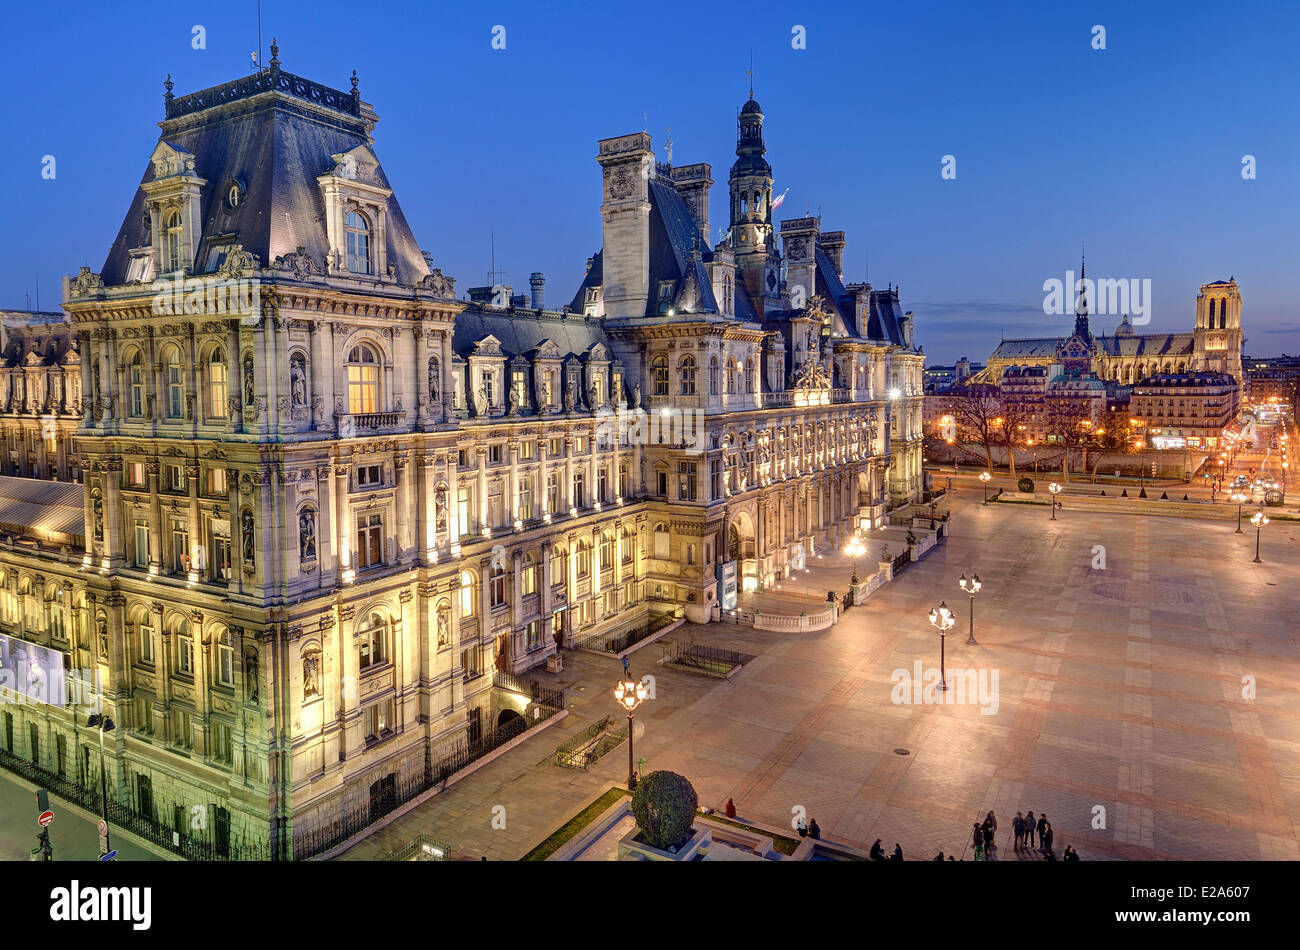 France, Paris, the Hotel de Ville (City Hall) and Notre-Dame cathedral ...